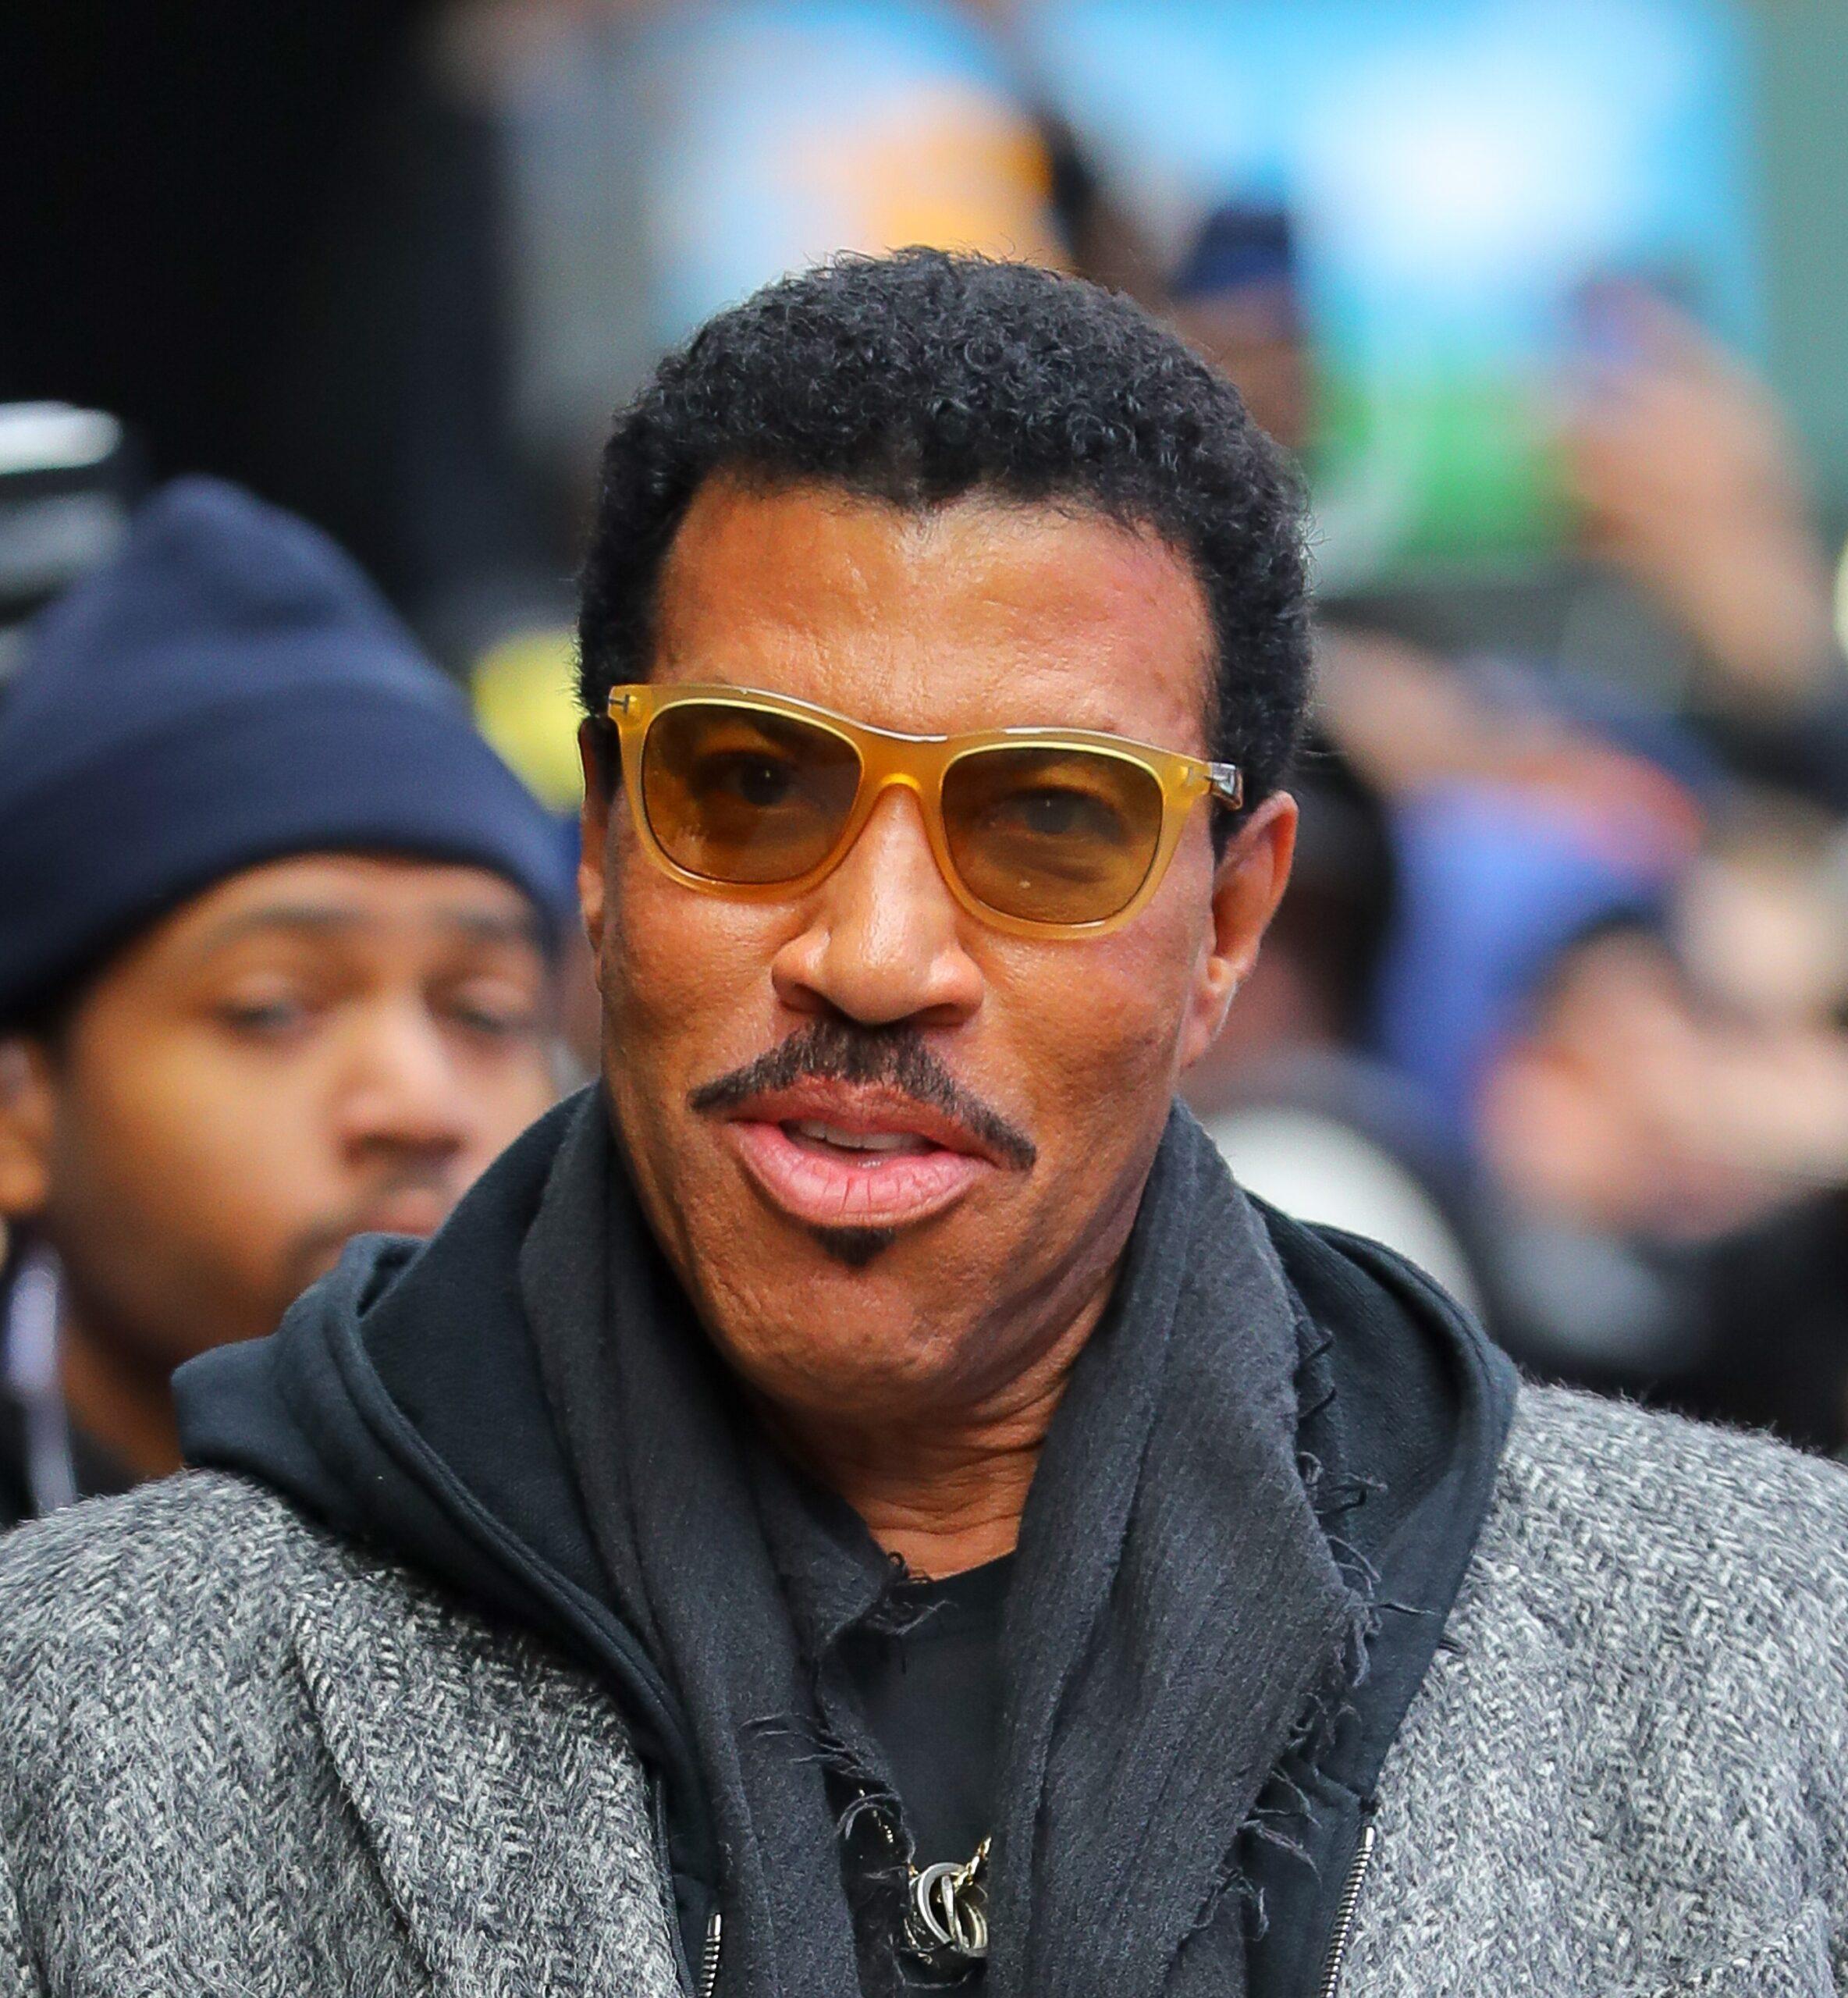 Lionel Richie seen leaving Good Morning America in NYC on Feb 27 2019